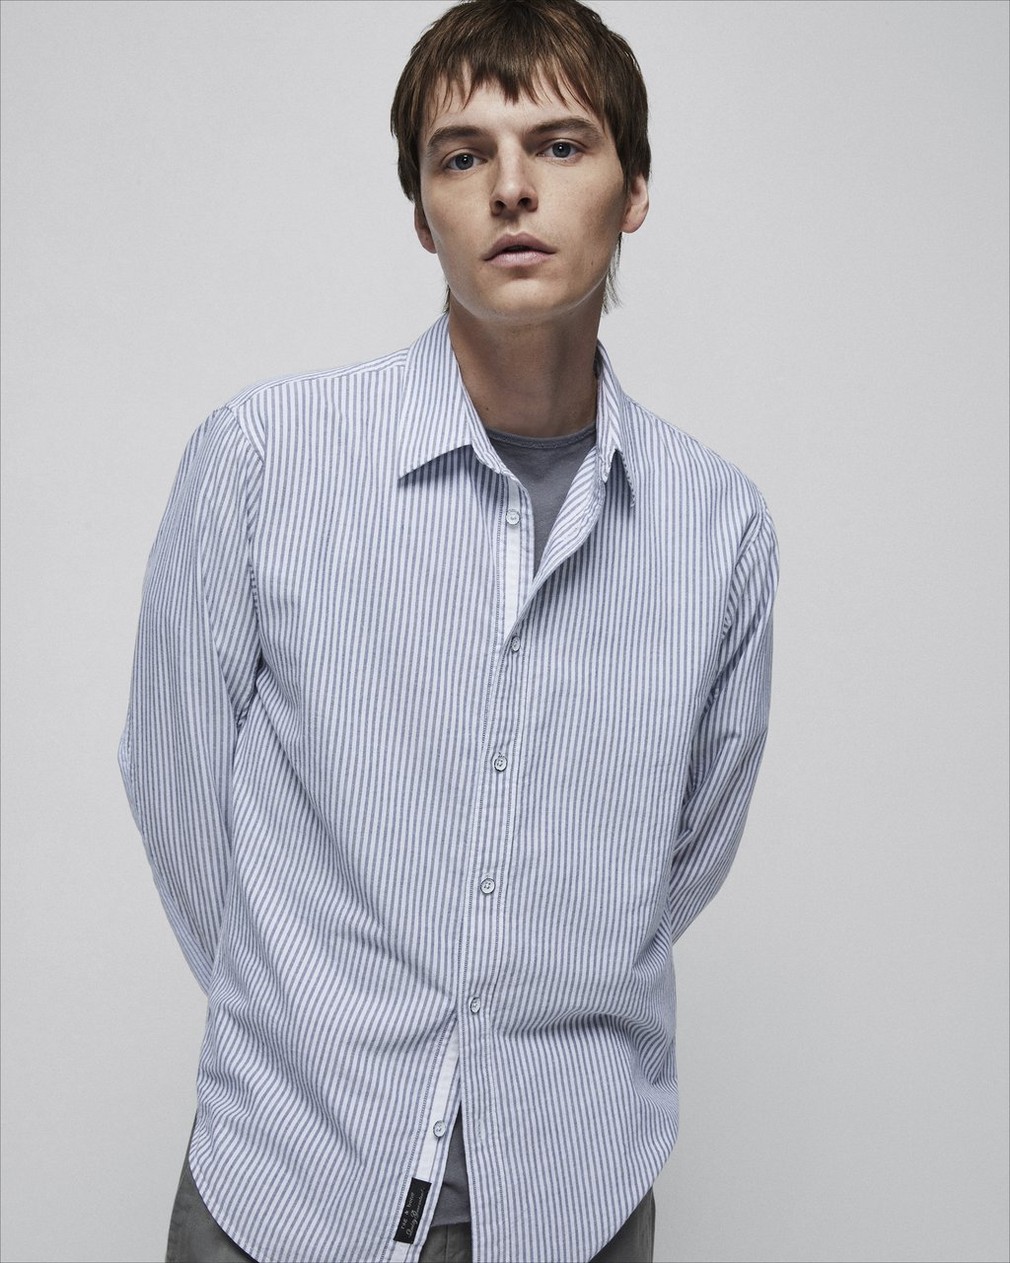 Fit 2 - Engineered Oxford Cotton Shirt